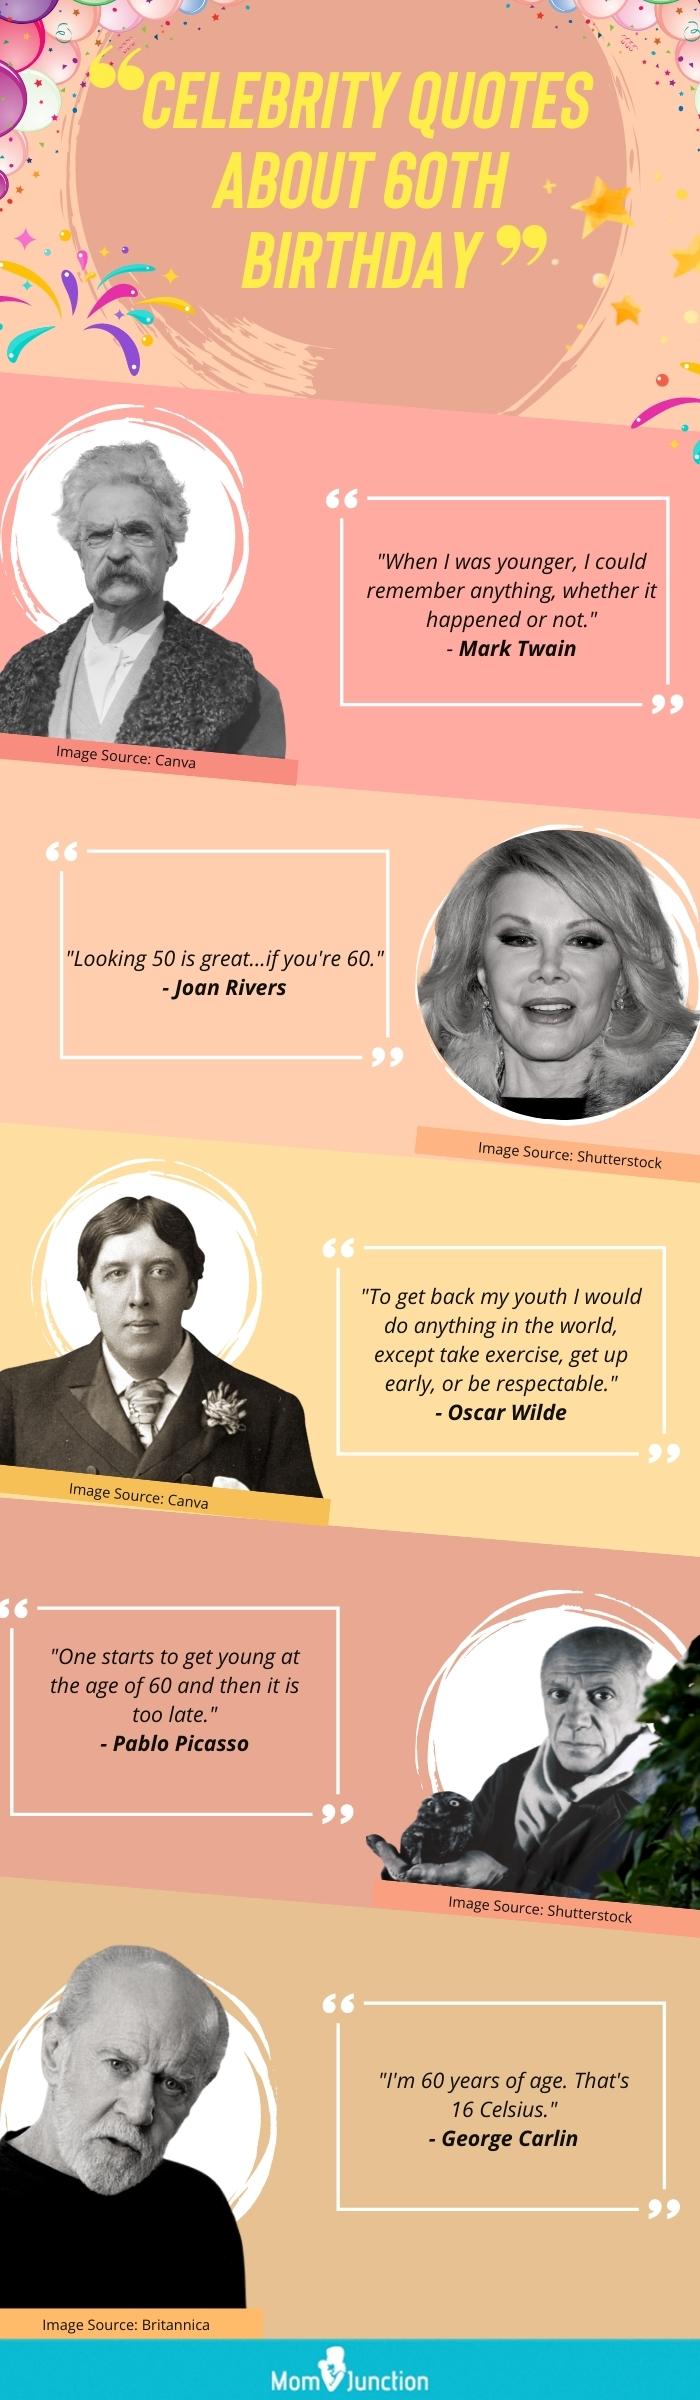 celebrity quotes about 60th birthday (infographic)